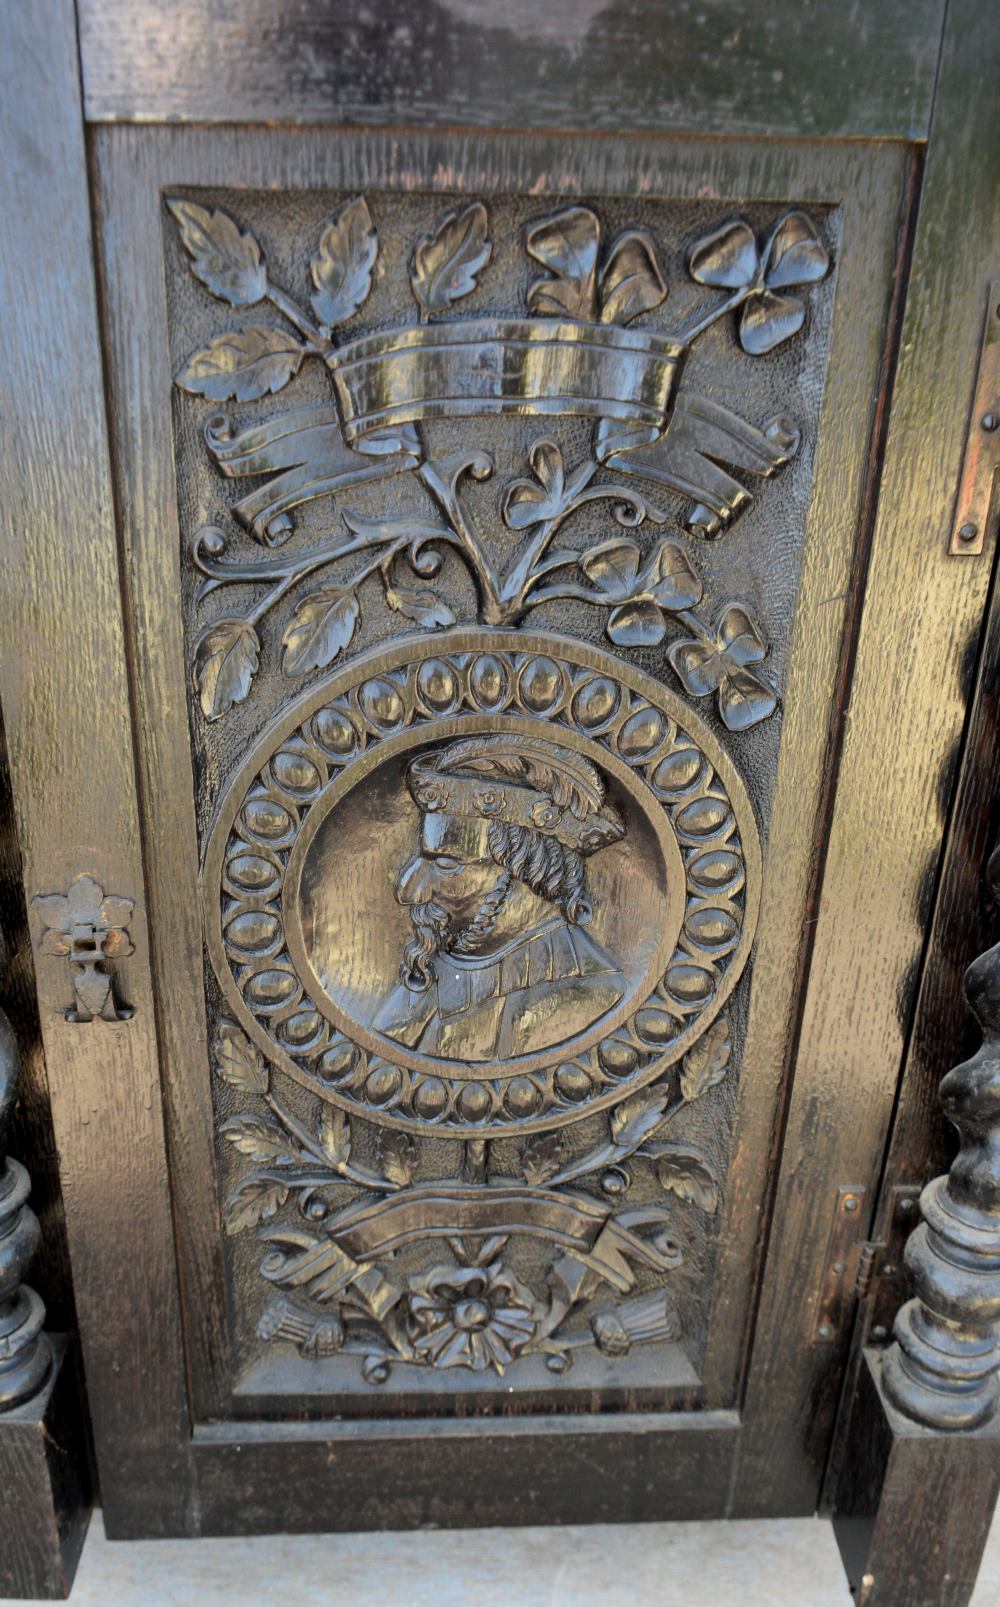 20th century oak cabinet, two cupboard doors carved with flowers and busts, having barley twist - Image 3 of 3